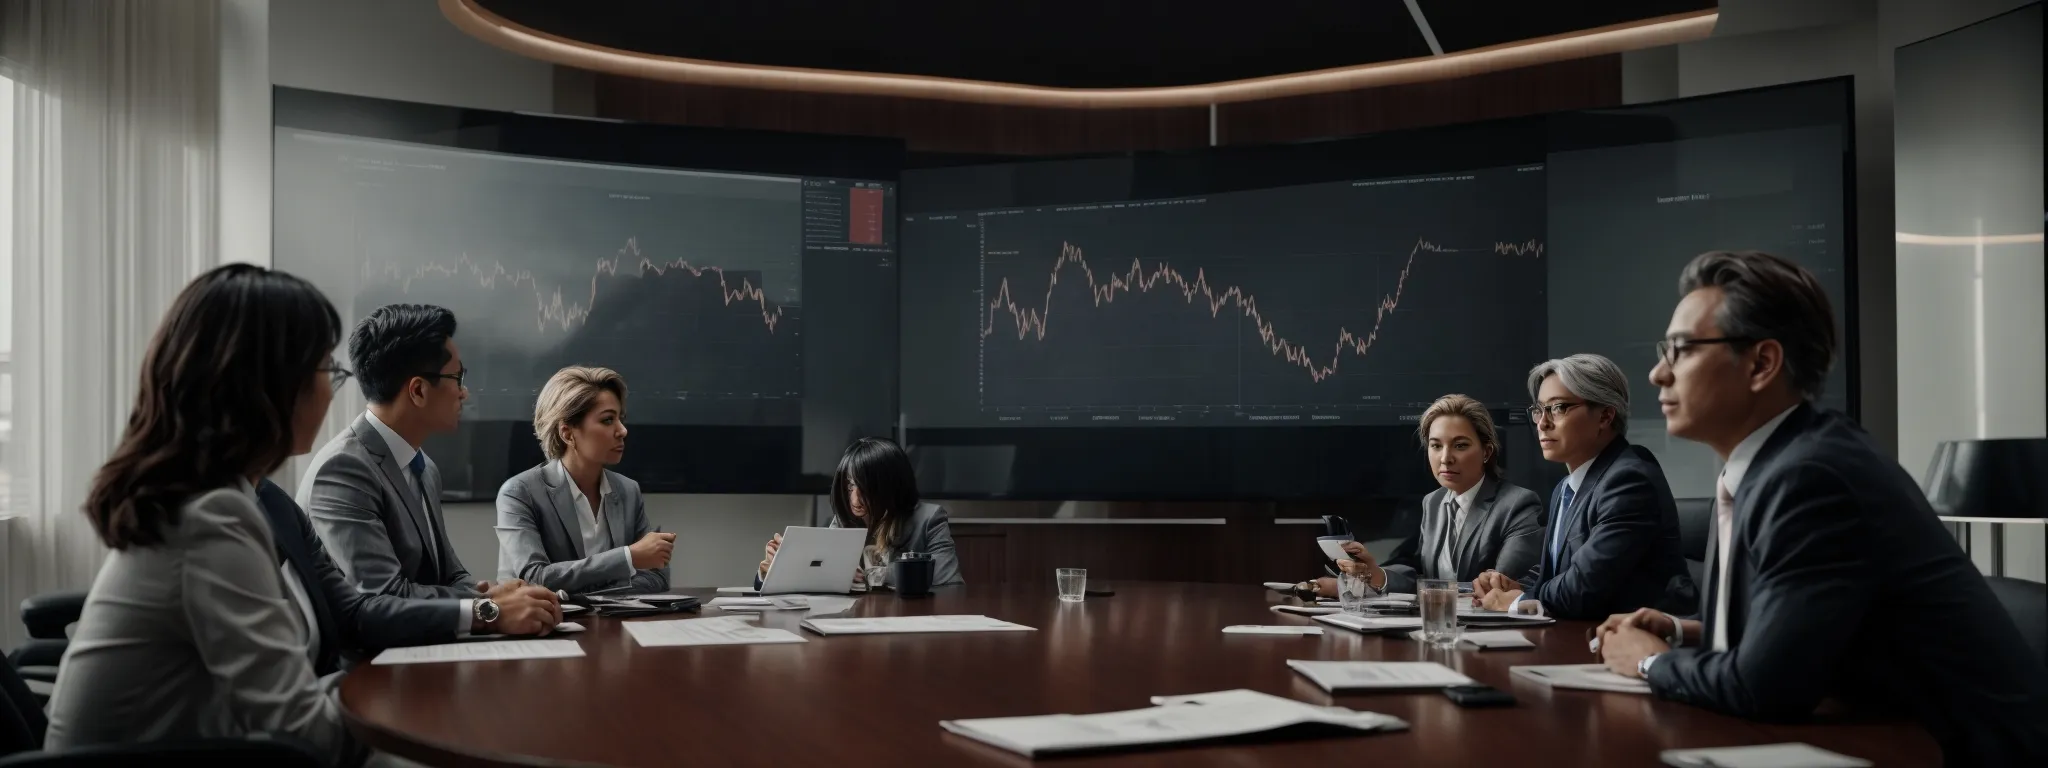 a strategic boardroom meeting in progress with executives reviewing graphs and charts displayed on a large screen.